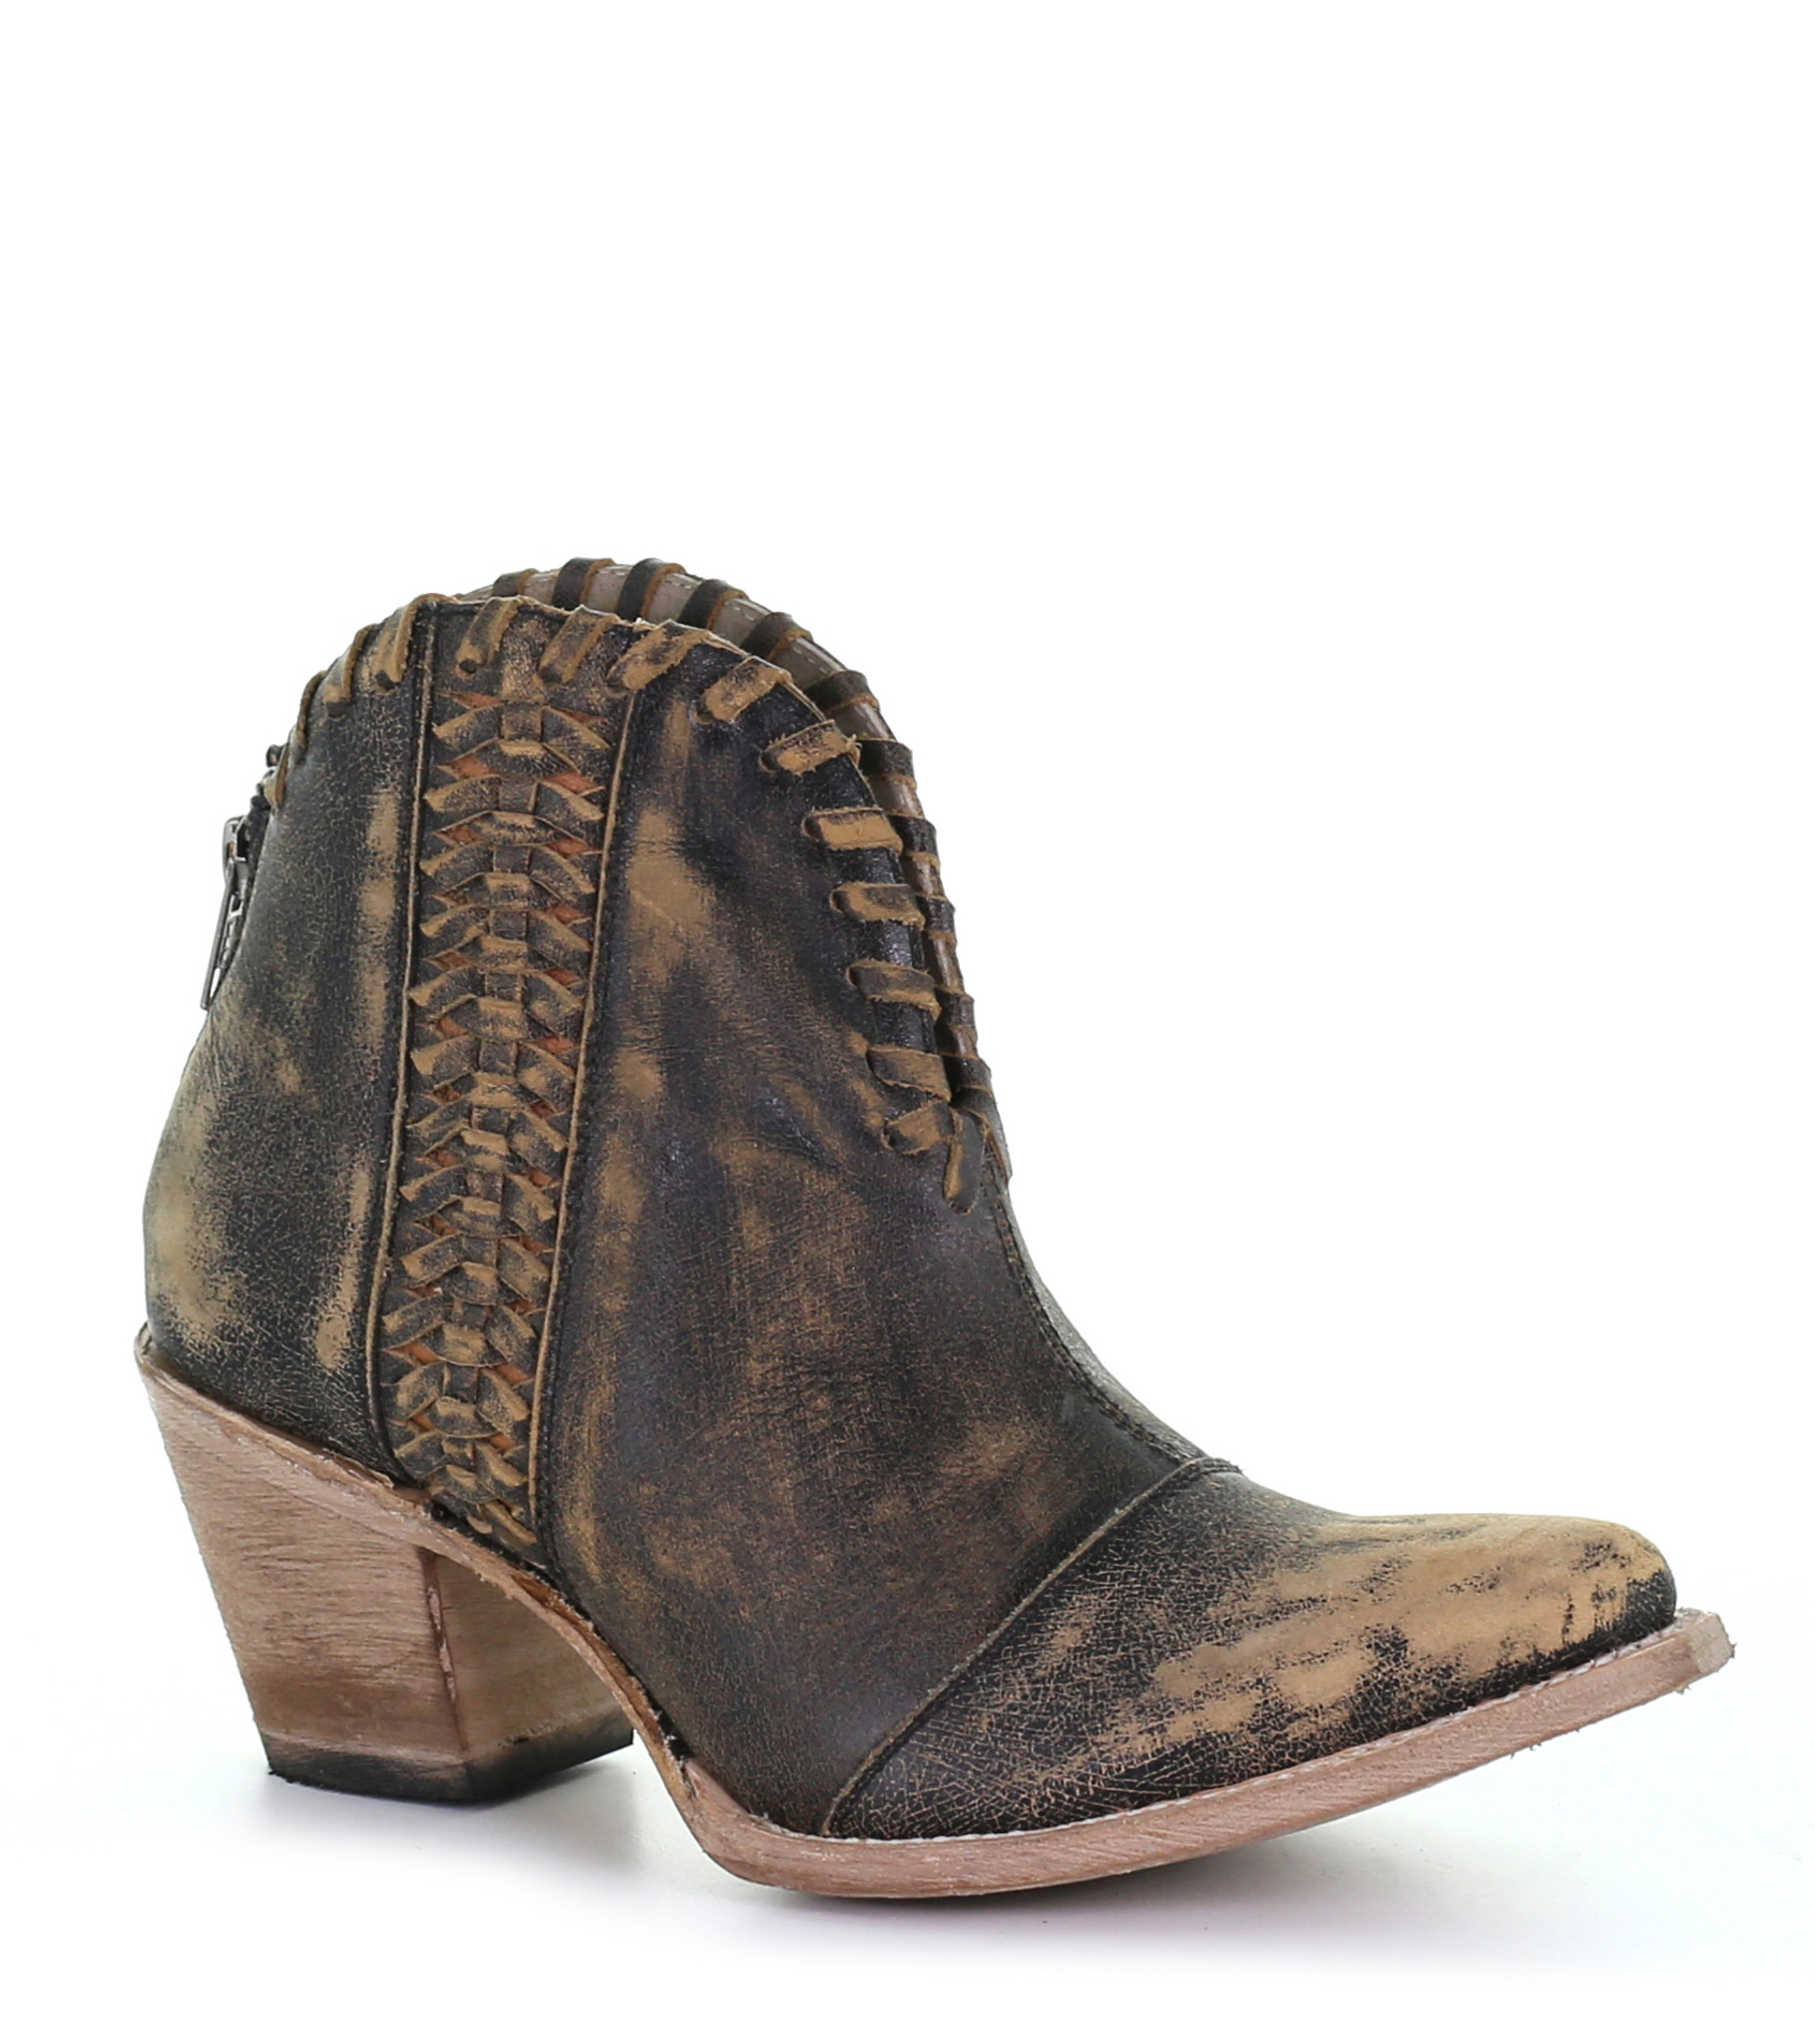 Corral Black Woven Ankle Boots Q5110